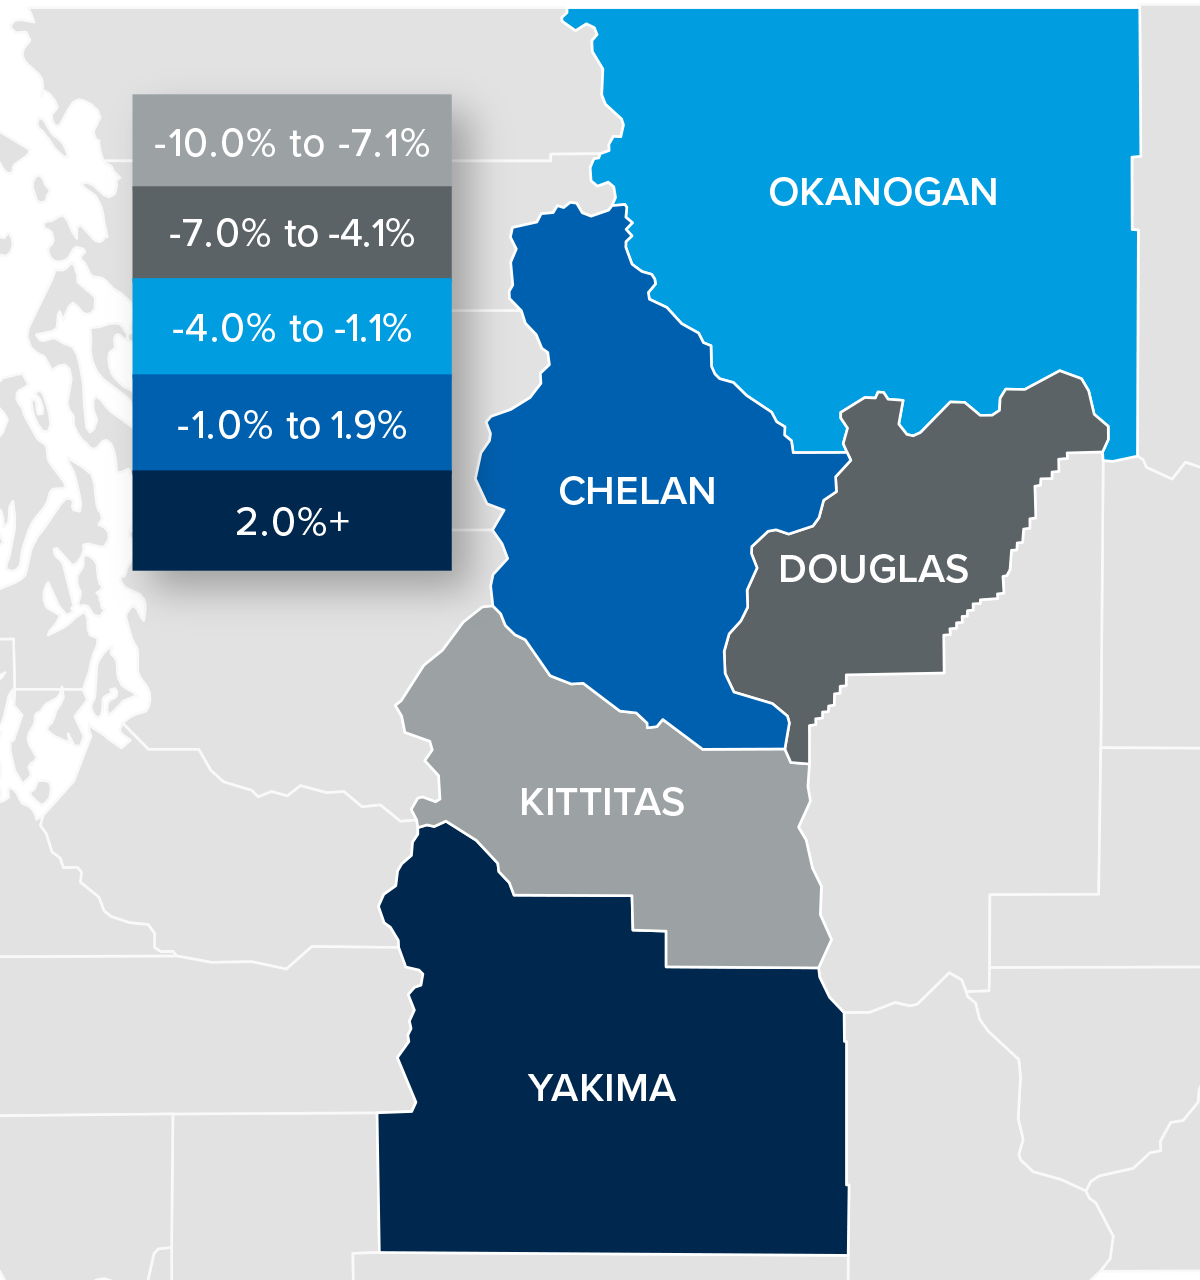 A map showing the real estate home prices percentage changes for various counties in Central Washington. Different colors correspond to different tiers of percentage change. Yakima County had a change of more than 2% and is represented in the corresponding navy color. Chelan was in the 1.9 to -1% range. Okanogan was in the -1.1% to -4% range. Douglas County was in -4.1% to -7% range. Kittitas was in the -7.1% to -10% range and is represented in the light grey color on the map.